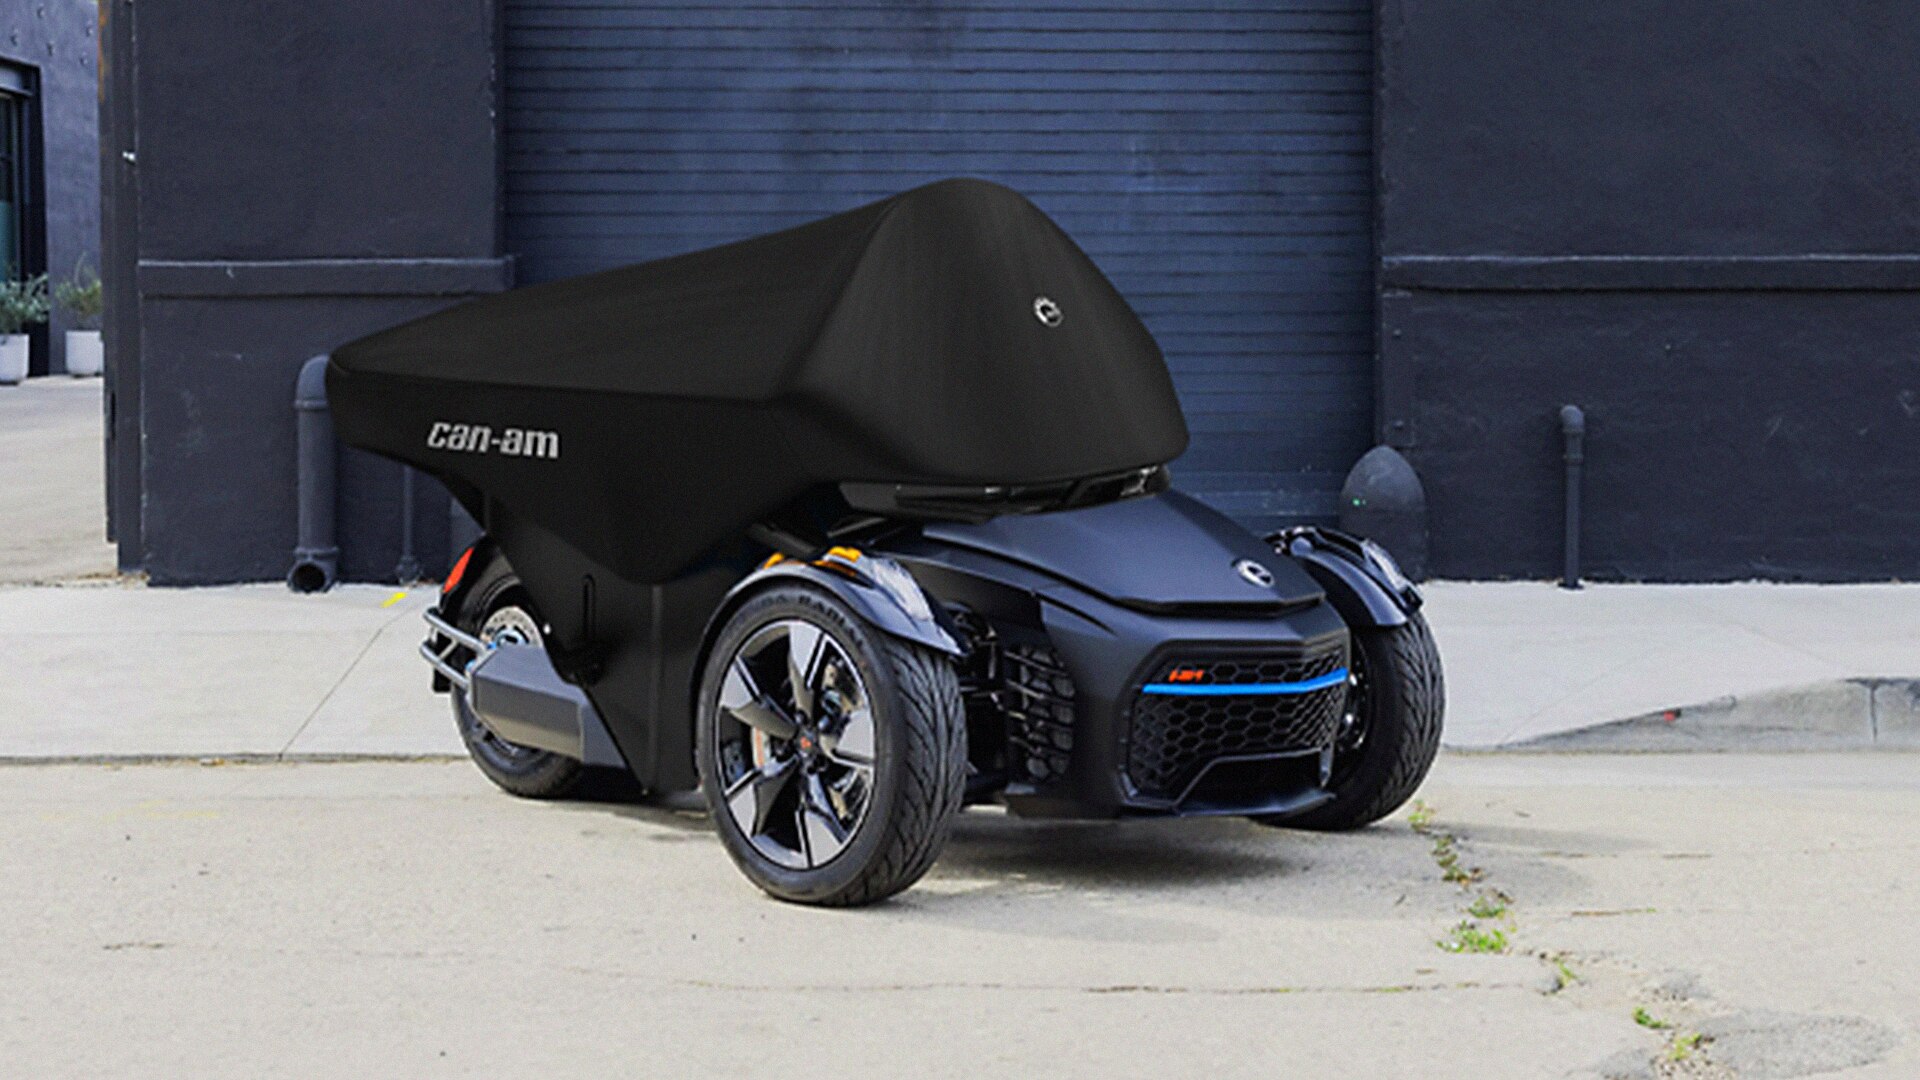 Can-Am 3-wheel vehicle under a storage cover